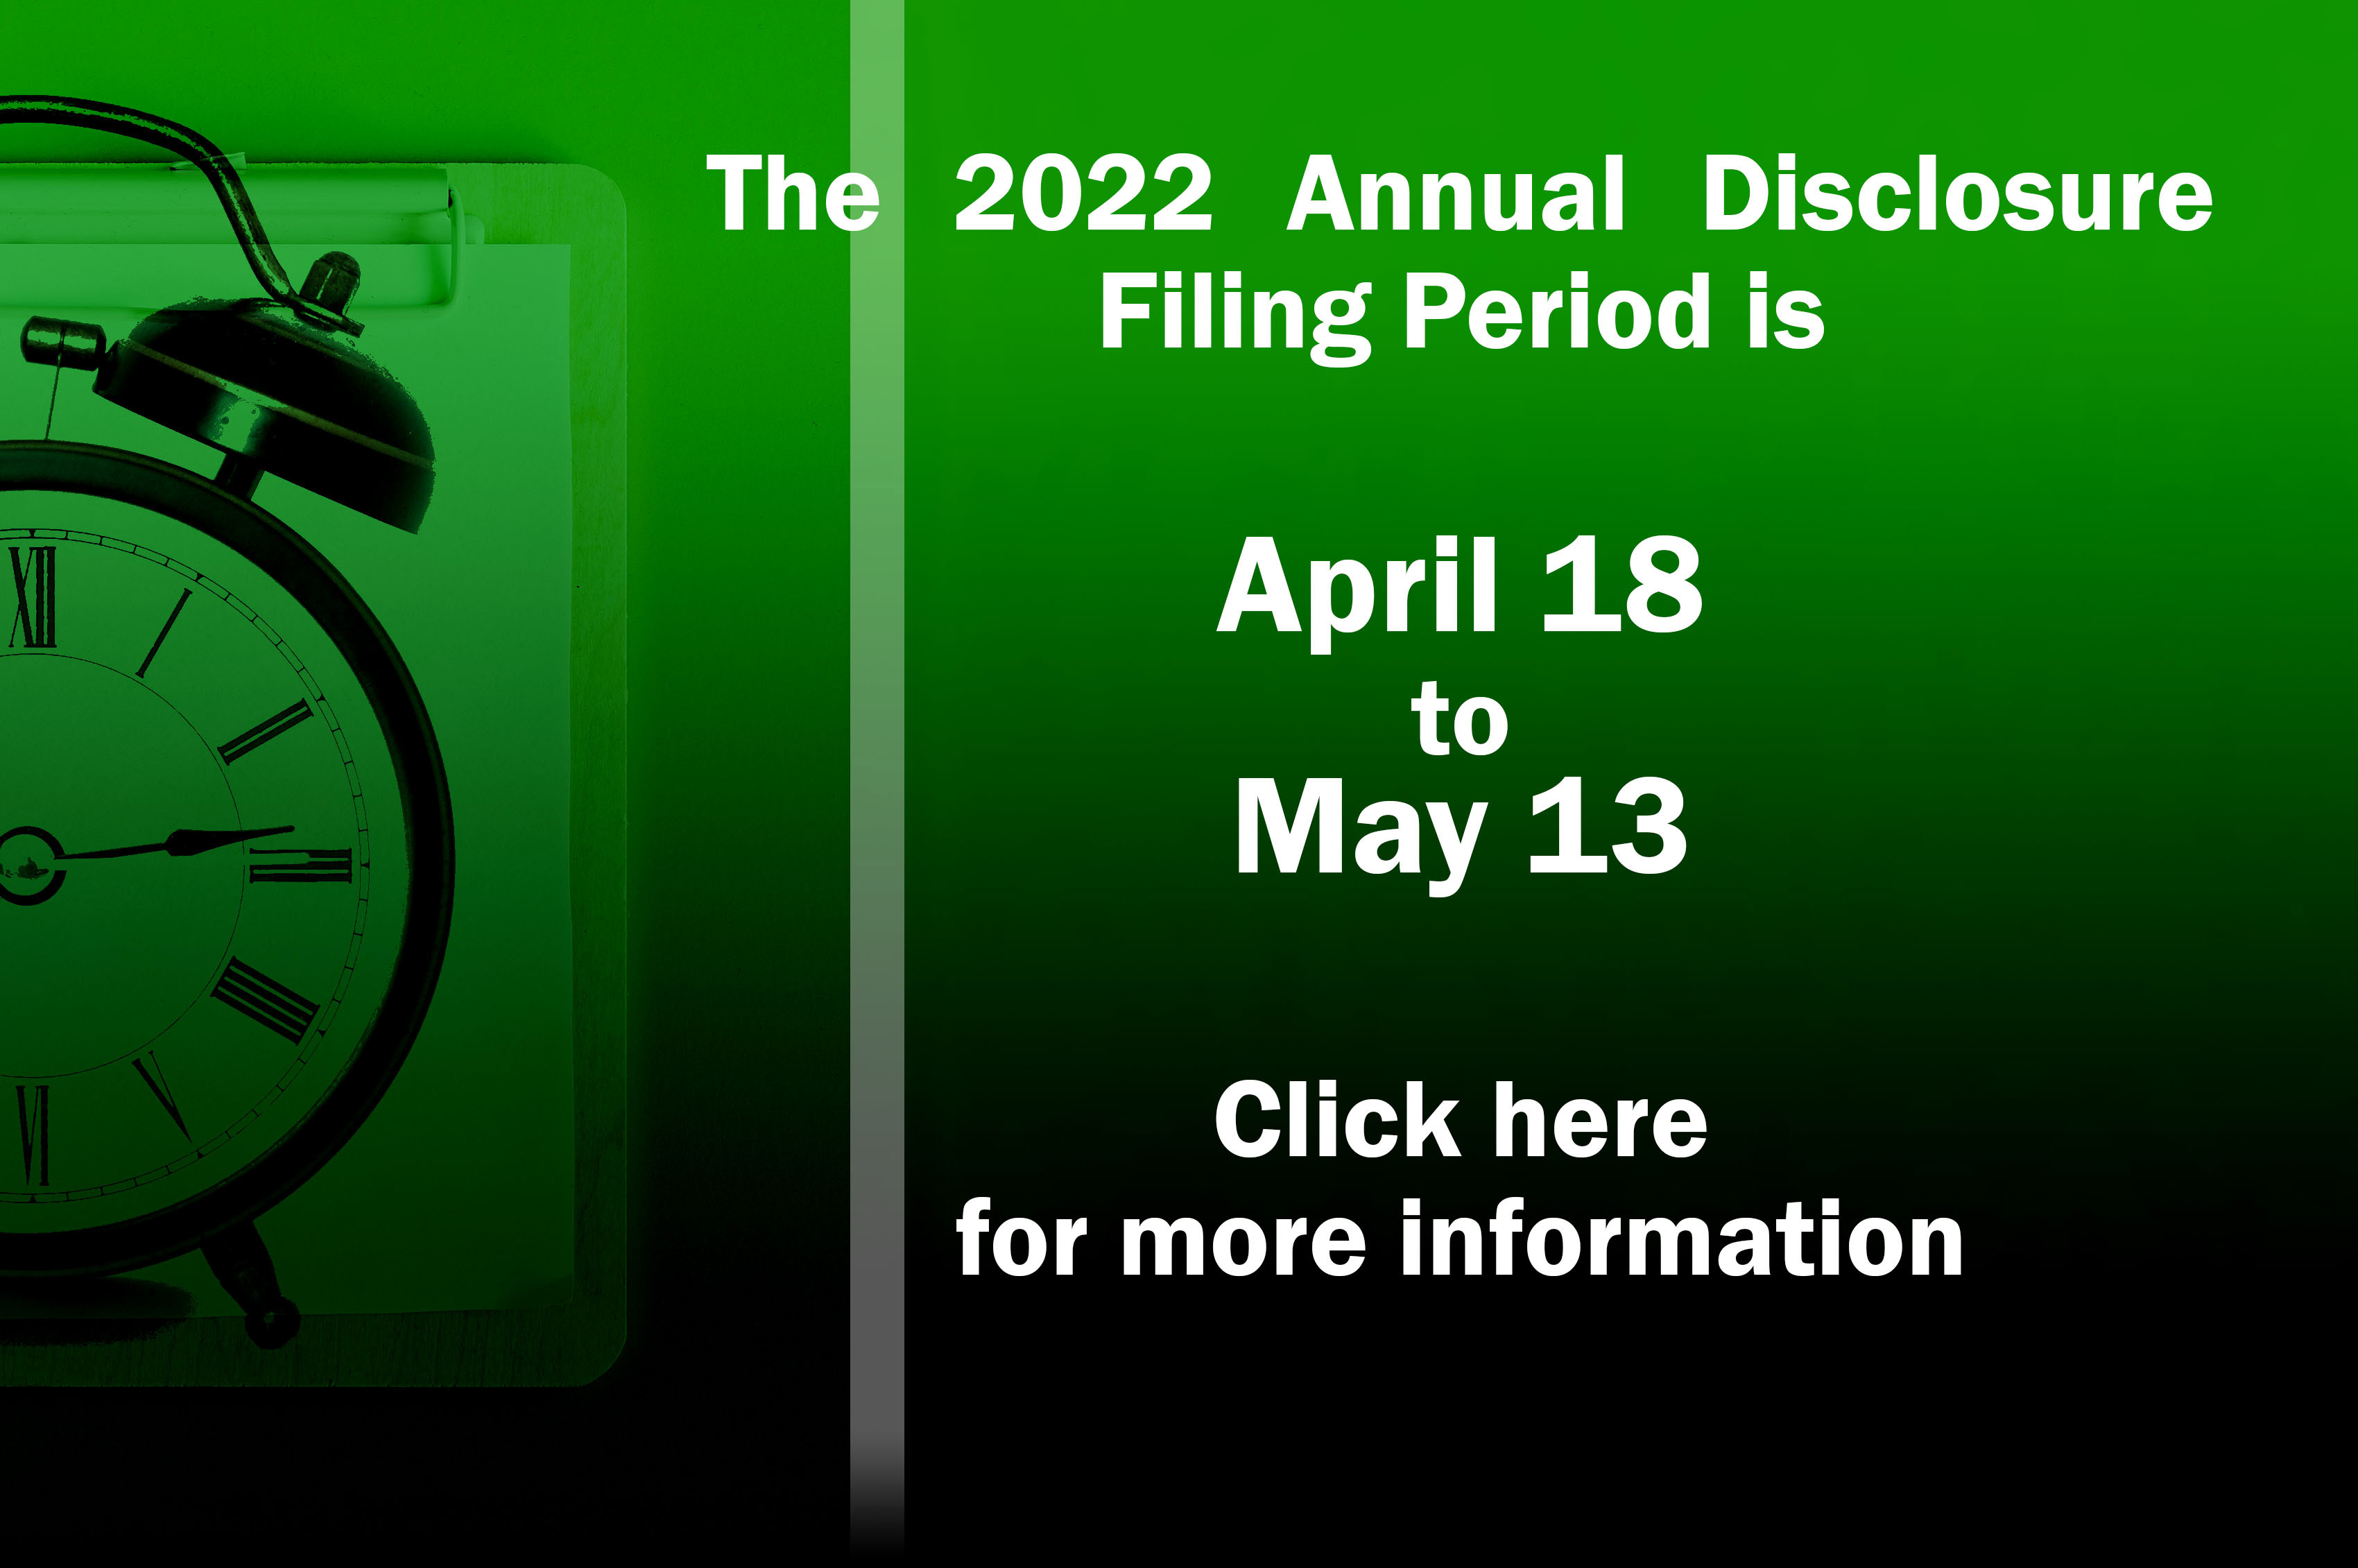 The Annual Disclosure season is about to begin
                                           